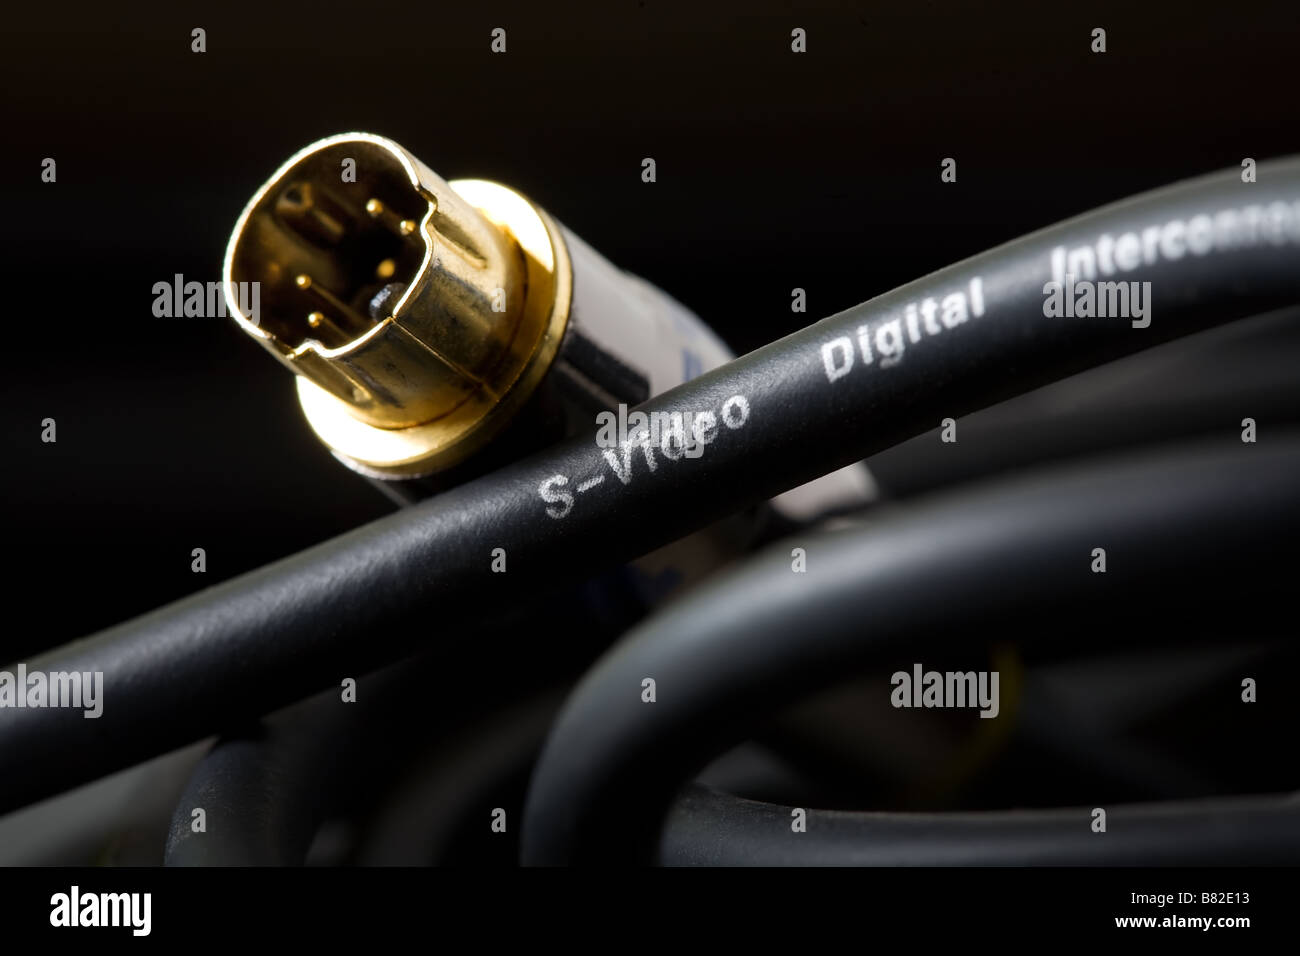 S-video cable with gold plated male connectors Stock Photo